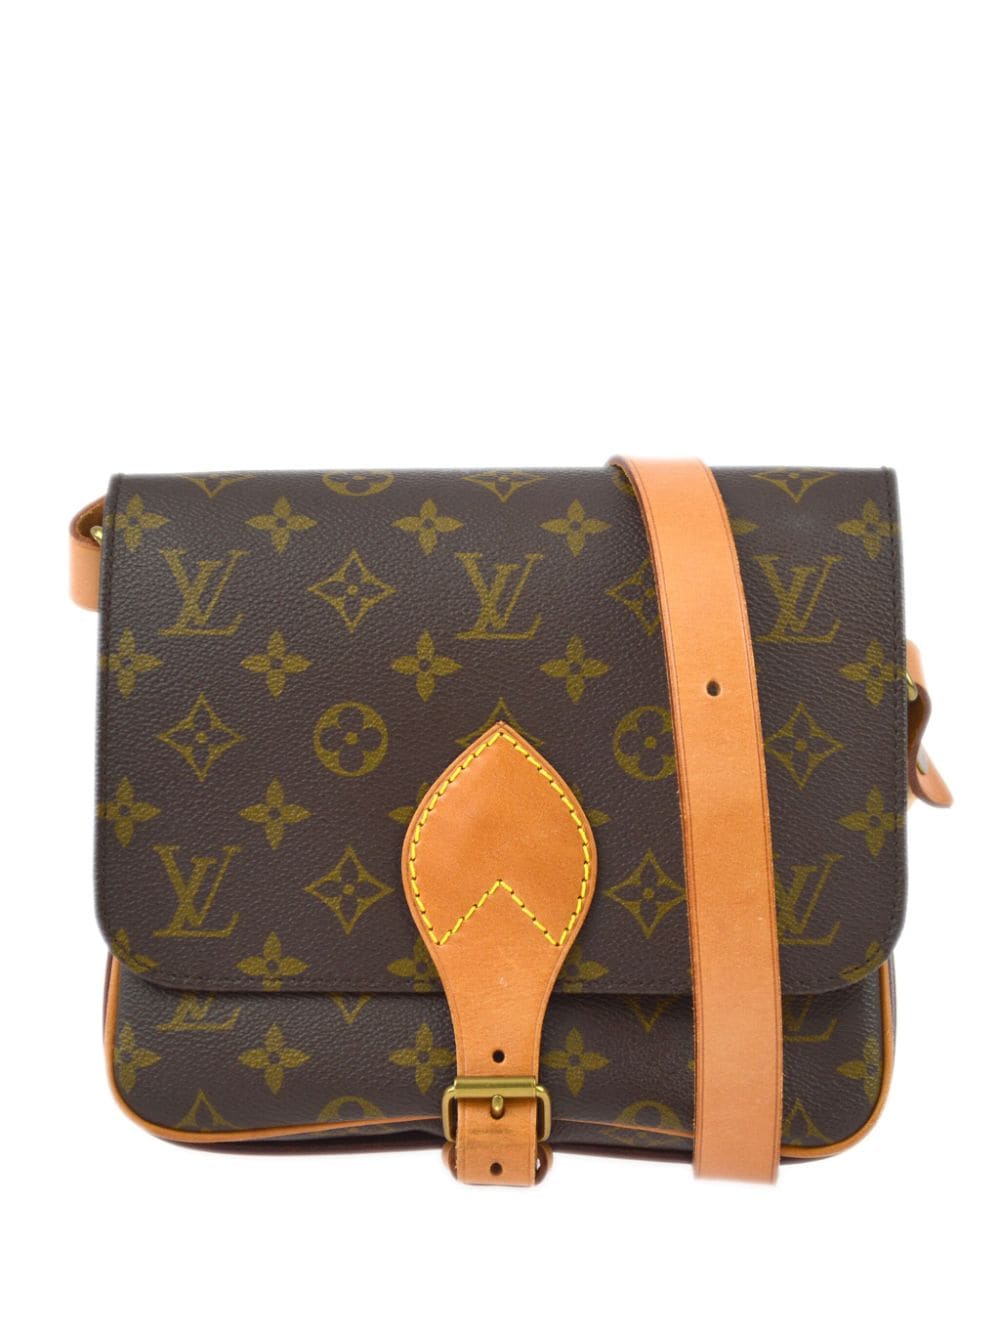 Pre-owned Louis Vuitton 1991 Cartouchiere Mm Shoulder Bag In Brown